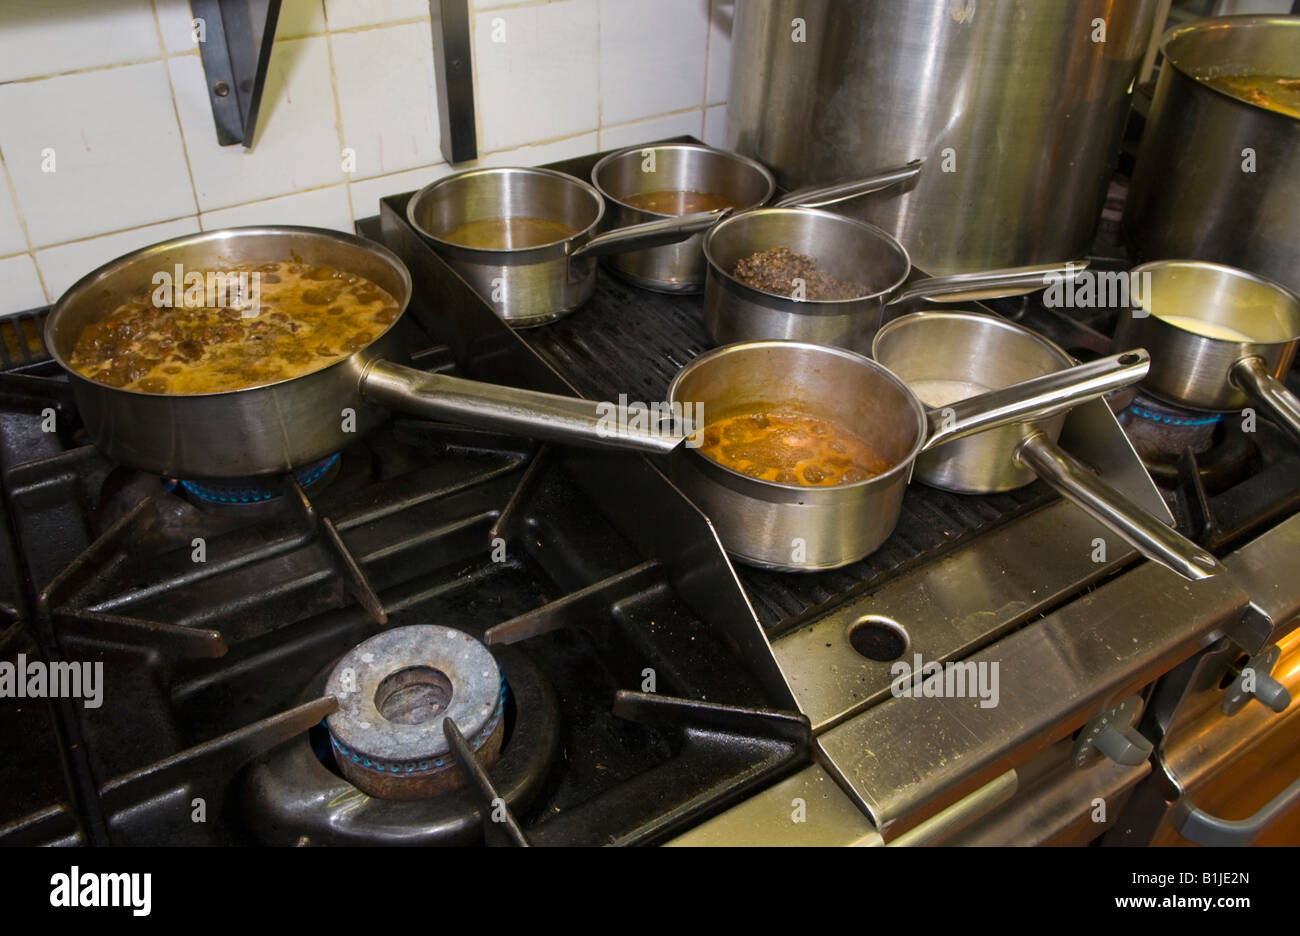 Pans simmering on the stove at The Walnut Tree Restaurant Llanddewi Skirrid Abergavenny Monmouthshire Wales UK Stock Photo